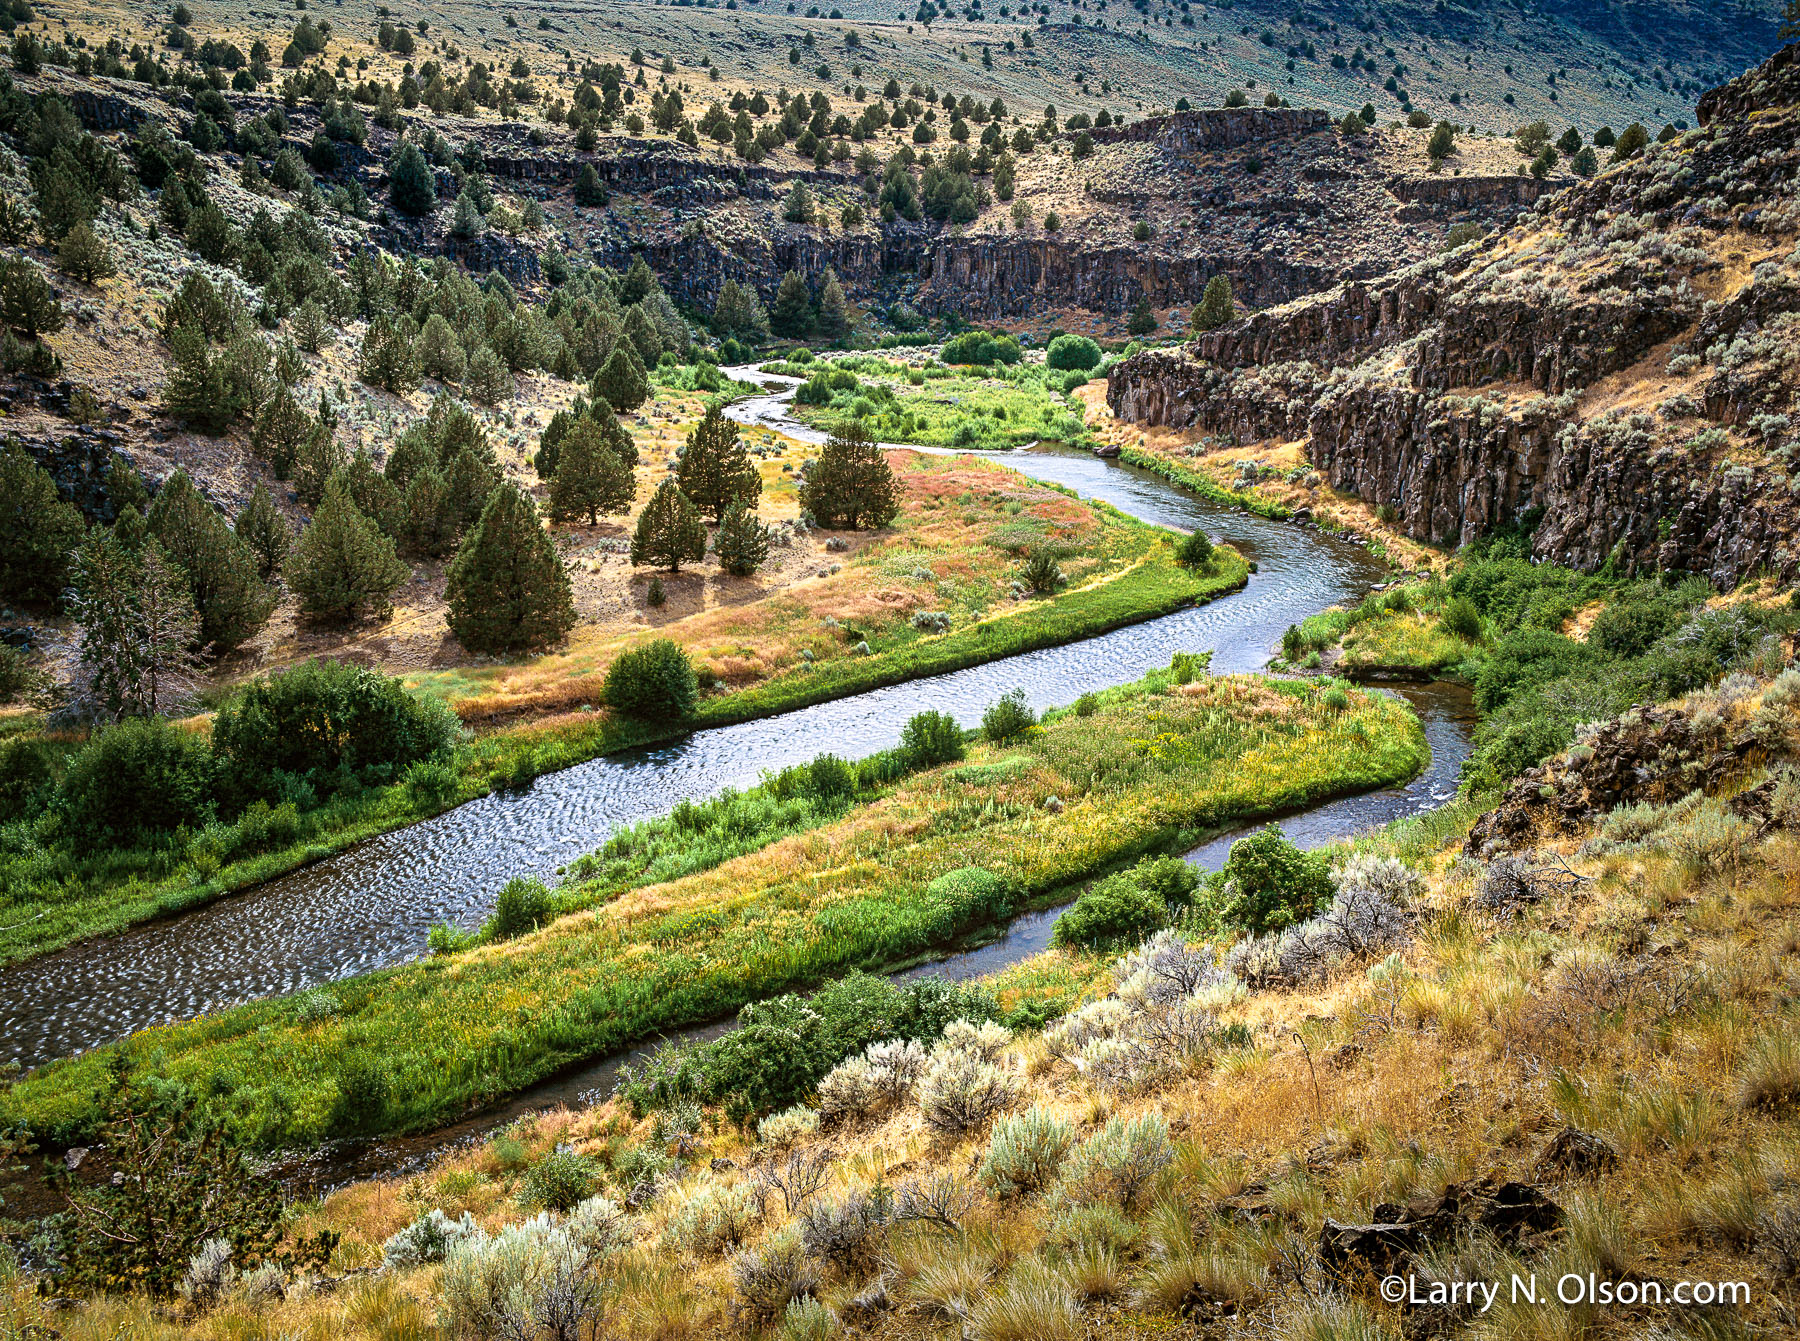 Donner Und Blitzen River, Steens Mountain, OR | A desert river flows through a carved out canyon of basalt with scattered Junipers, Sage, and Bunchgrass.